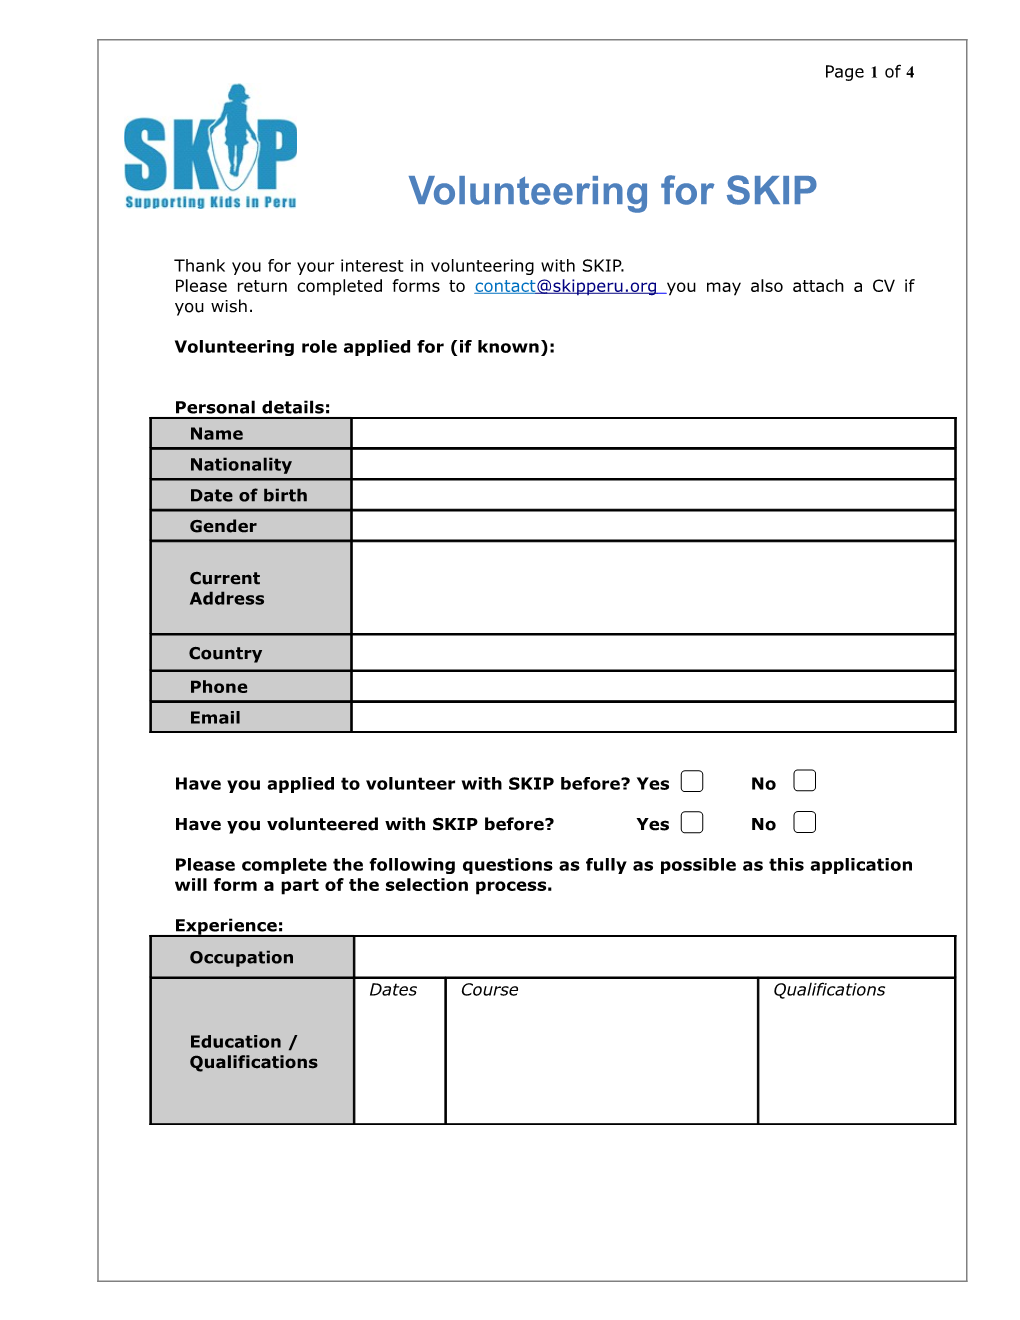 Thank You for Your Interest in Volunteering with SKIP